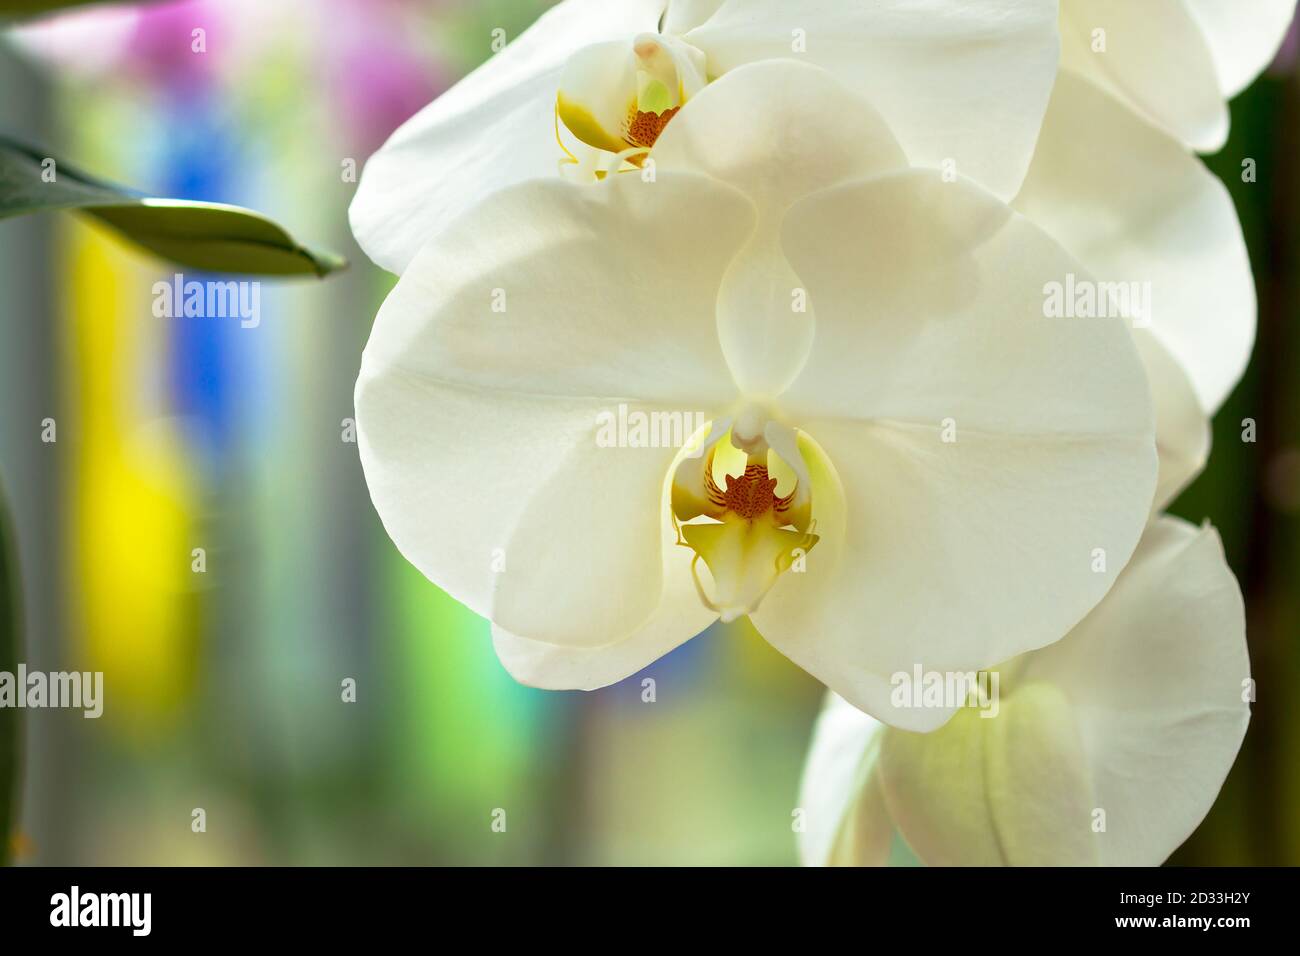 A Bouquet Of White Phalaenopsis Orchid Stock Photo